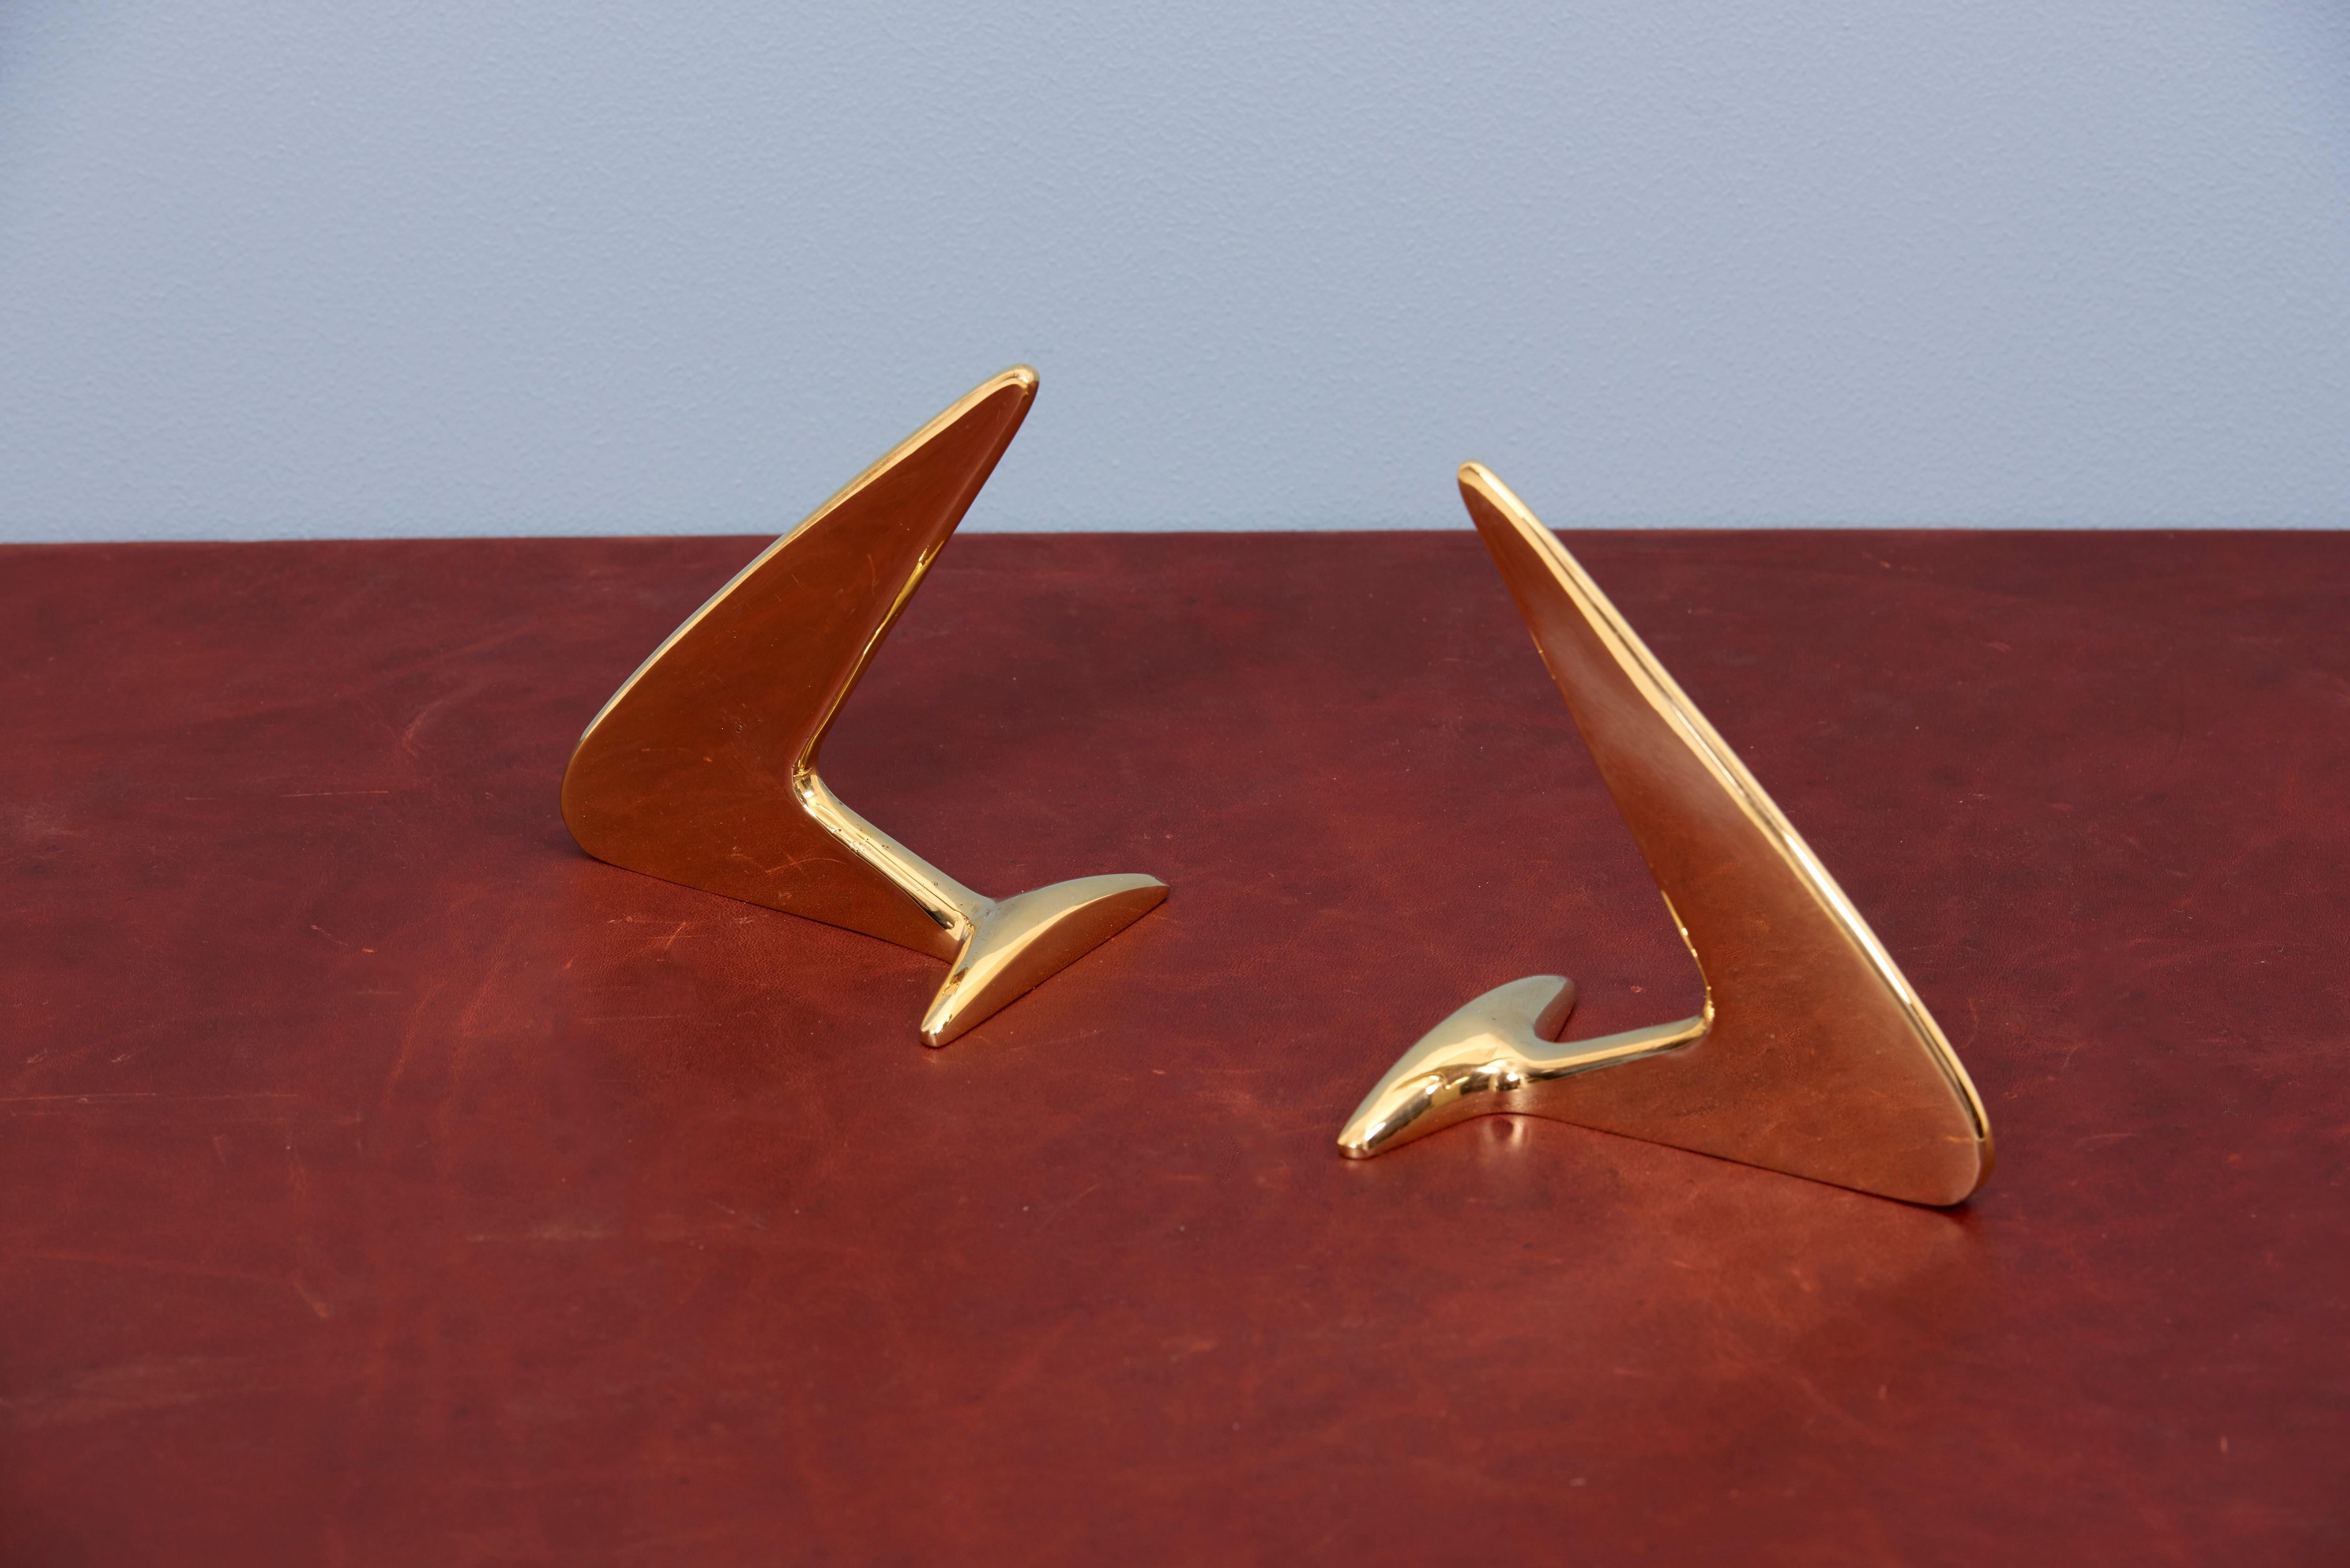 Classic pair of Carl Auböck bookends in a patina and polish brass mix.